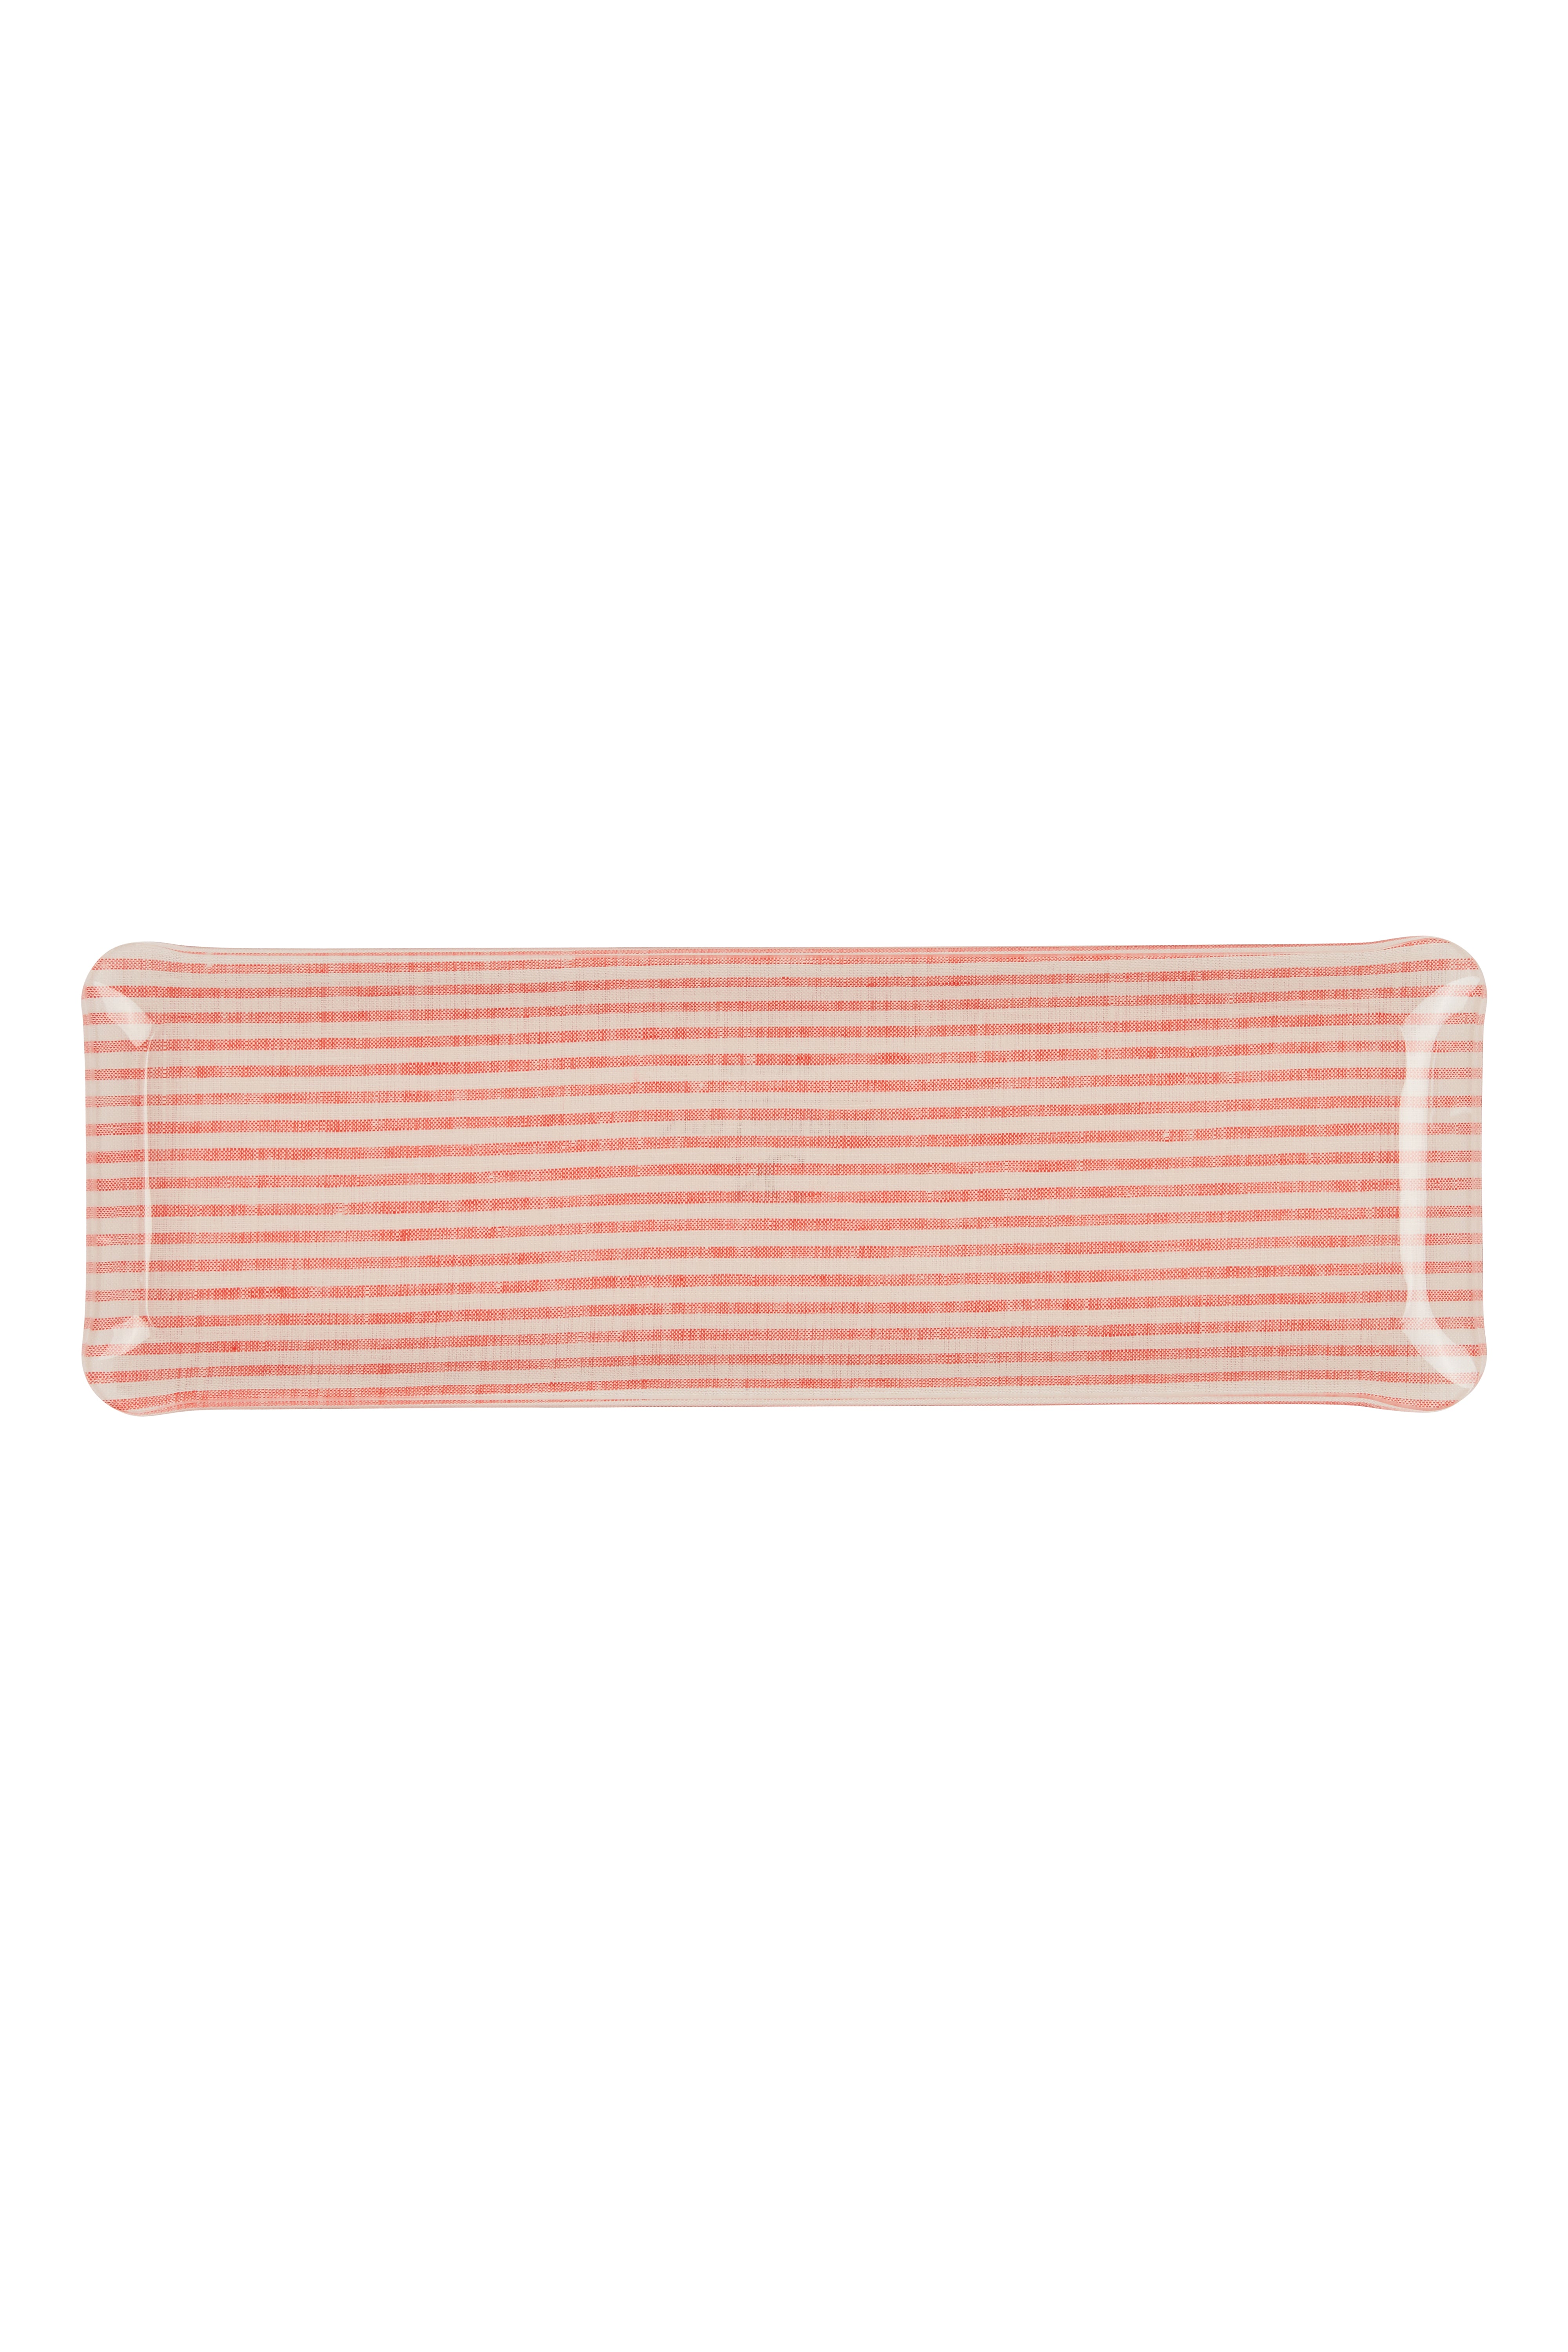 Nina Campbell Fabric Tray Oblong - Stripe Coral and White